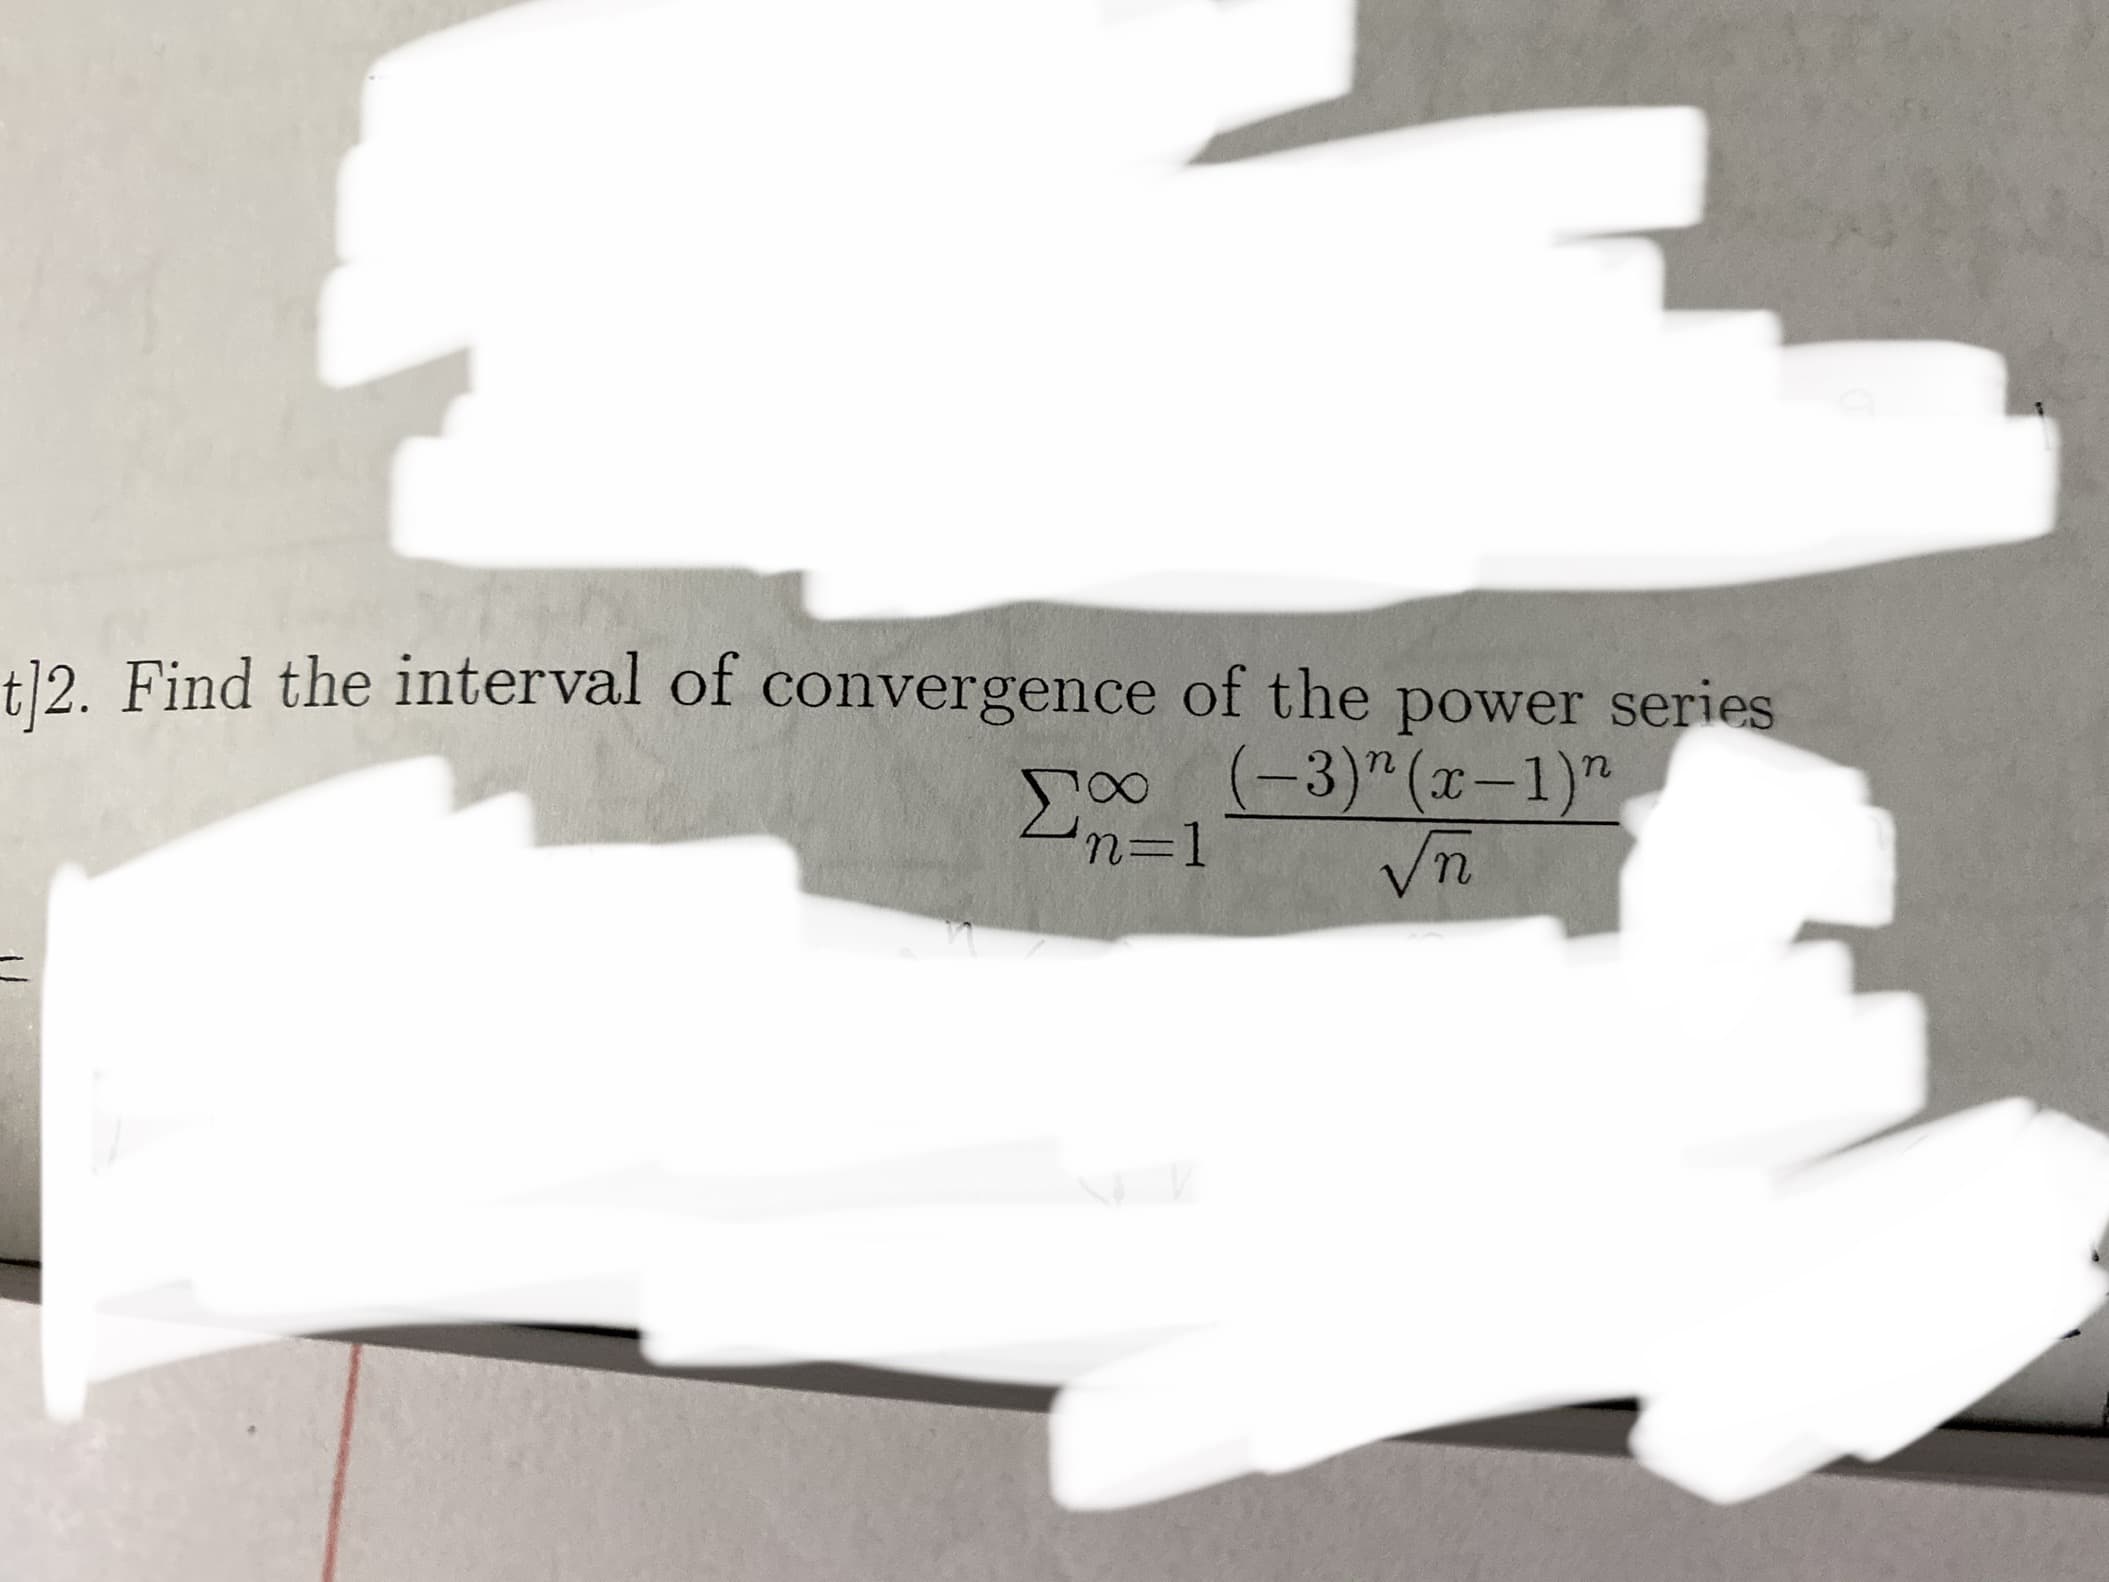 t]2. Find the interval of convergence of the power series
00 -3)" (x-1)"
3%3D1
Σγ-
